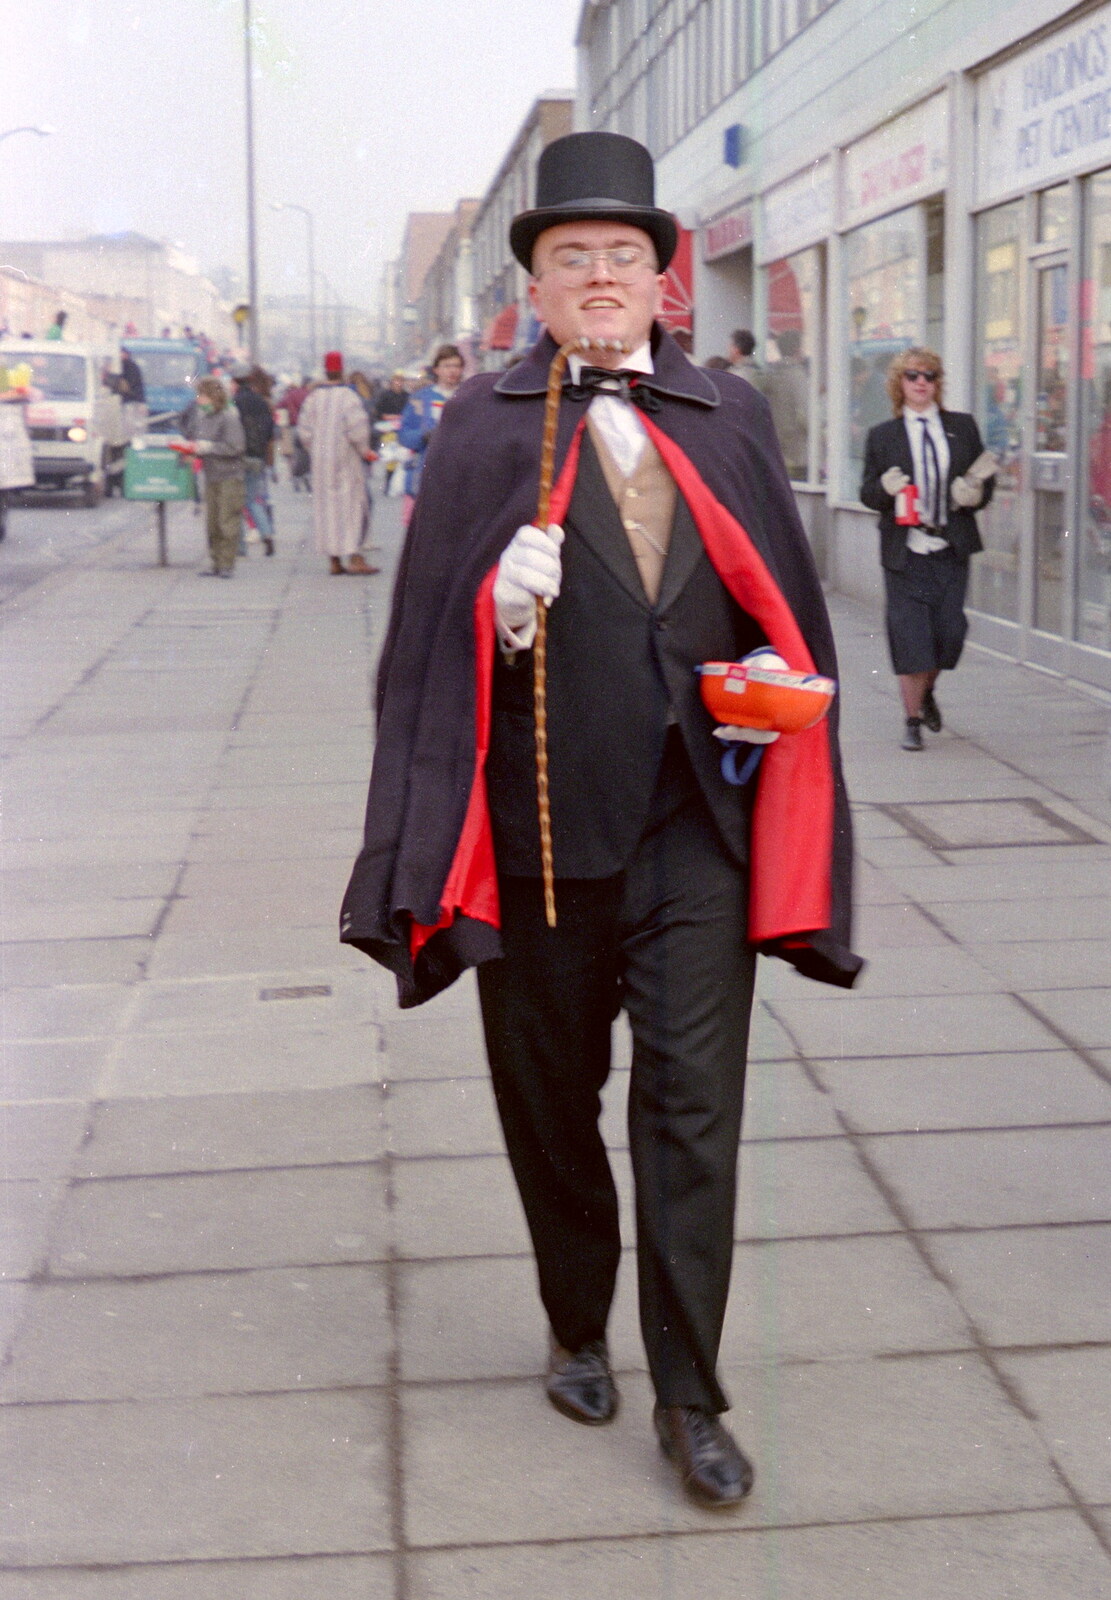 Little Lord Fauntleroy from Uni: PPSU "Jazz" RAG Street Parade, Plymouth, Devon - 17th February 1986